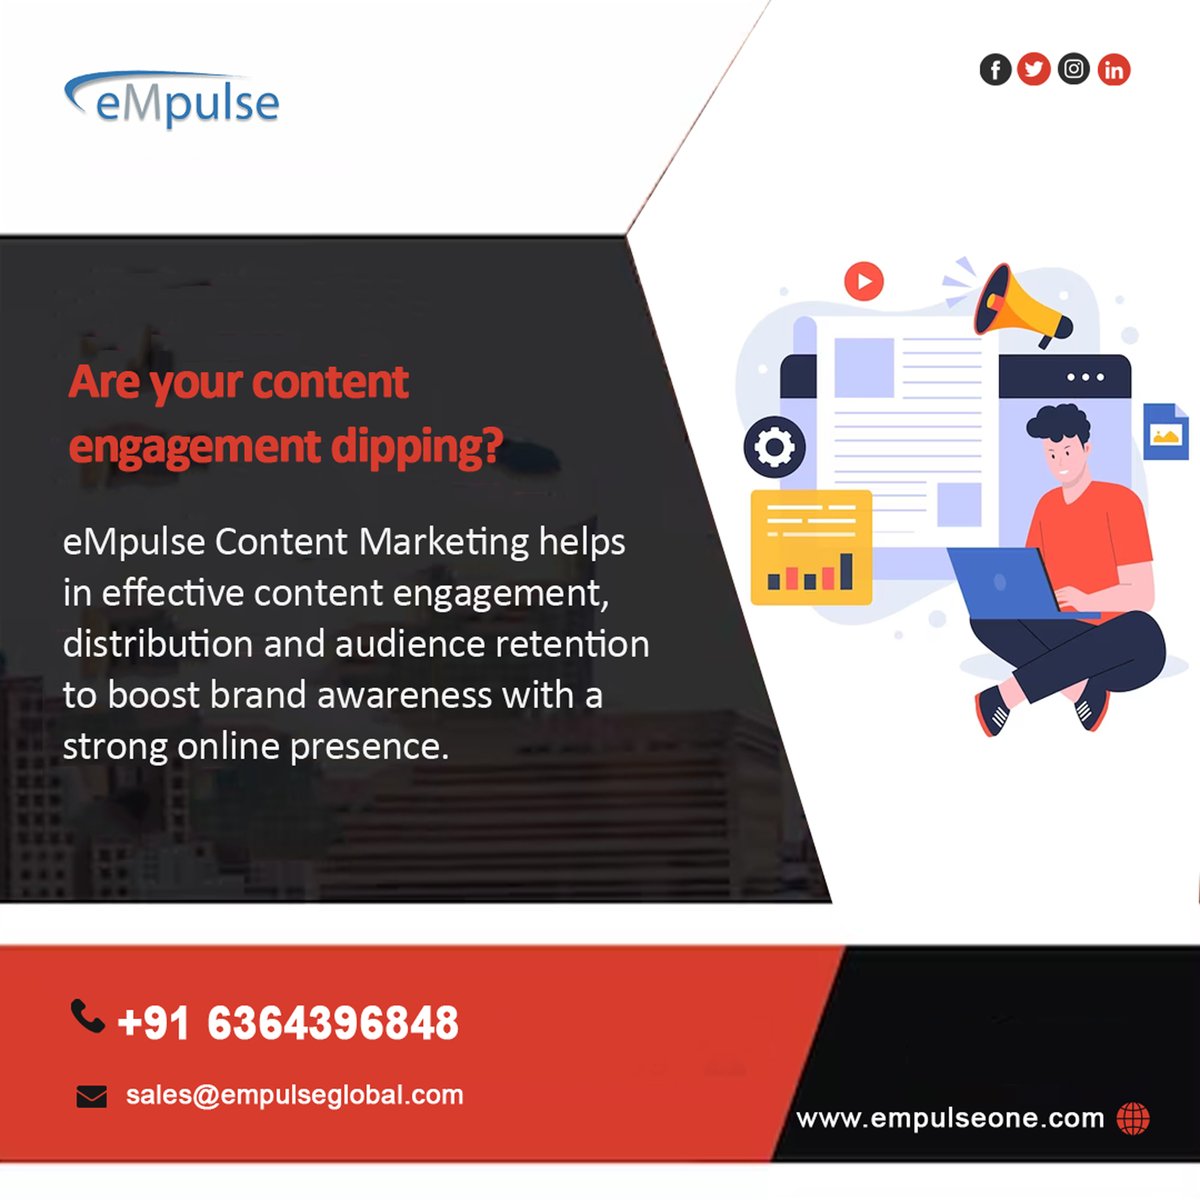 Are your content engagement dipping? eMpulse Content Marketing helps in effective content engagement, distribution and audience retention to boost brand awareness with a strong online presence. Visit: empulseglobal.com #empulseglobal #ContentMarketing #connectengagement